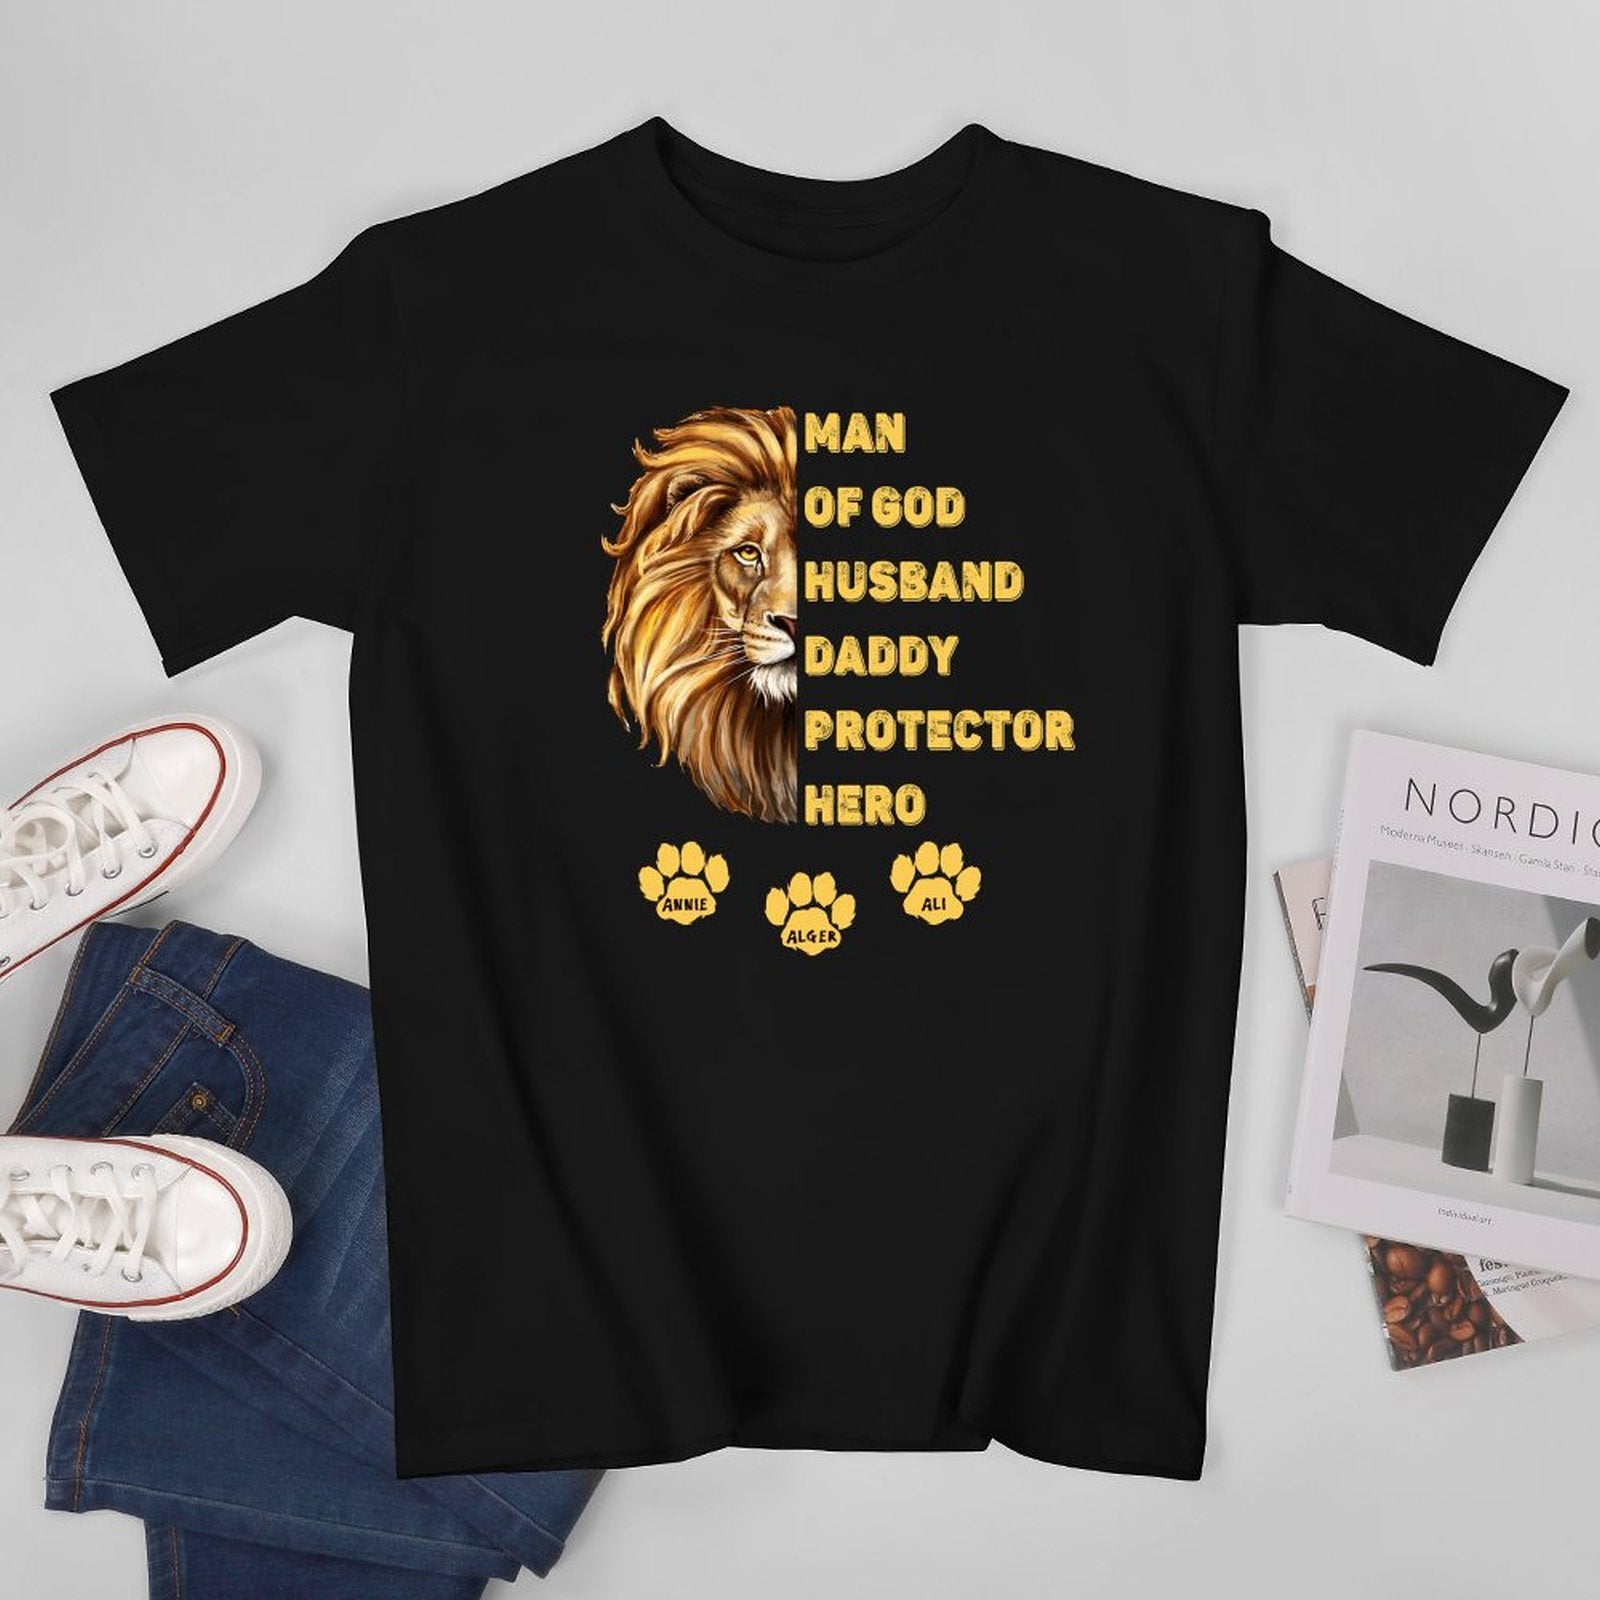 Personalized Custom T-Shirt For Men, Man of God Husband Daddy Protector Hero Tshirt - Dad Gift - Father's Day Tshirt - Husband Tshirt - colorfulcustom